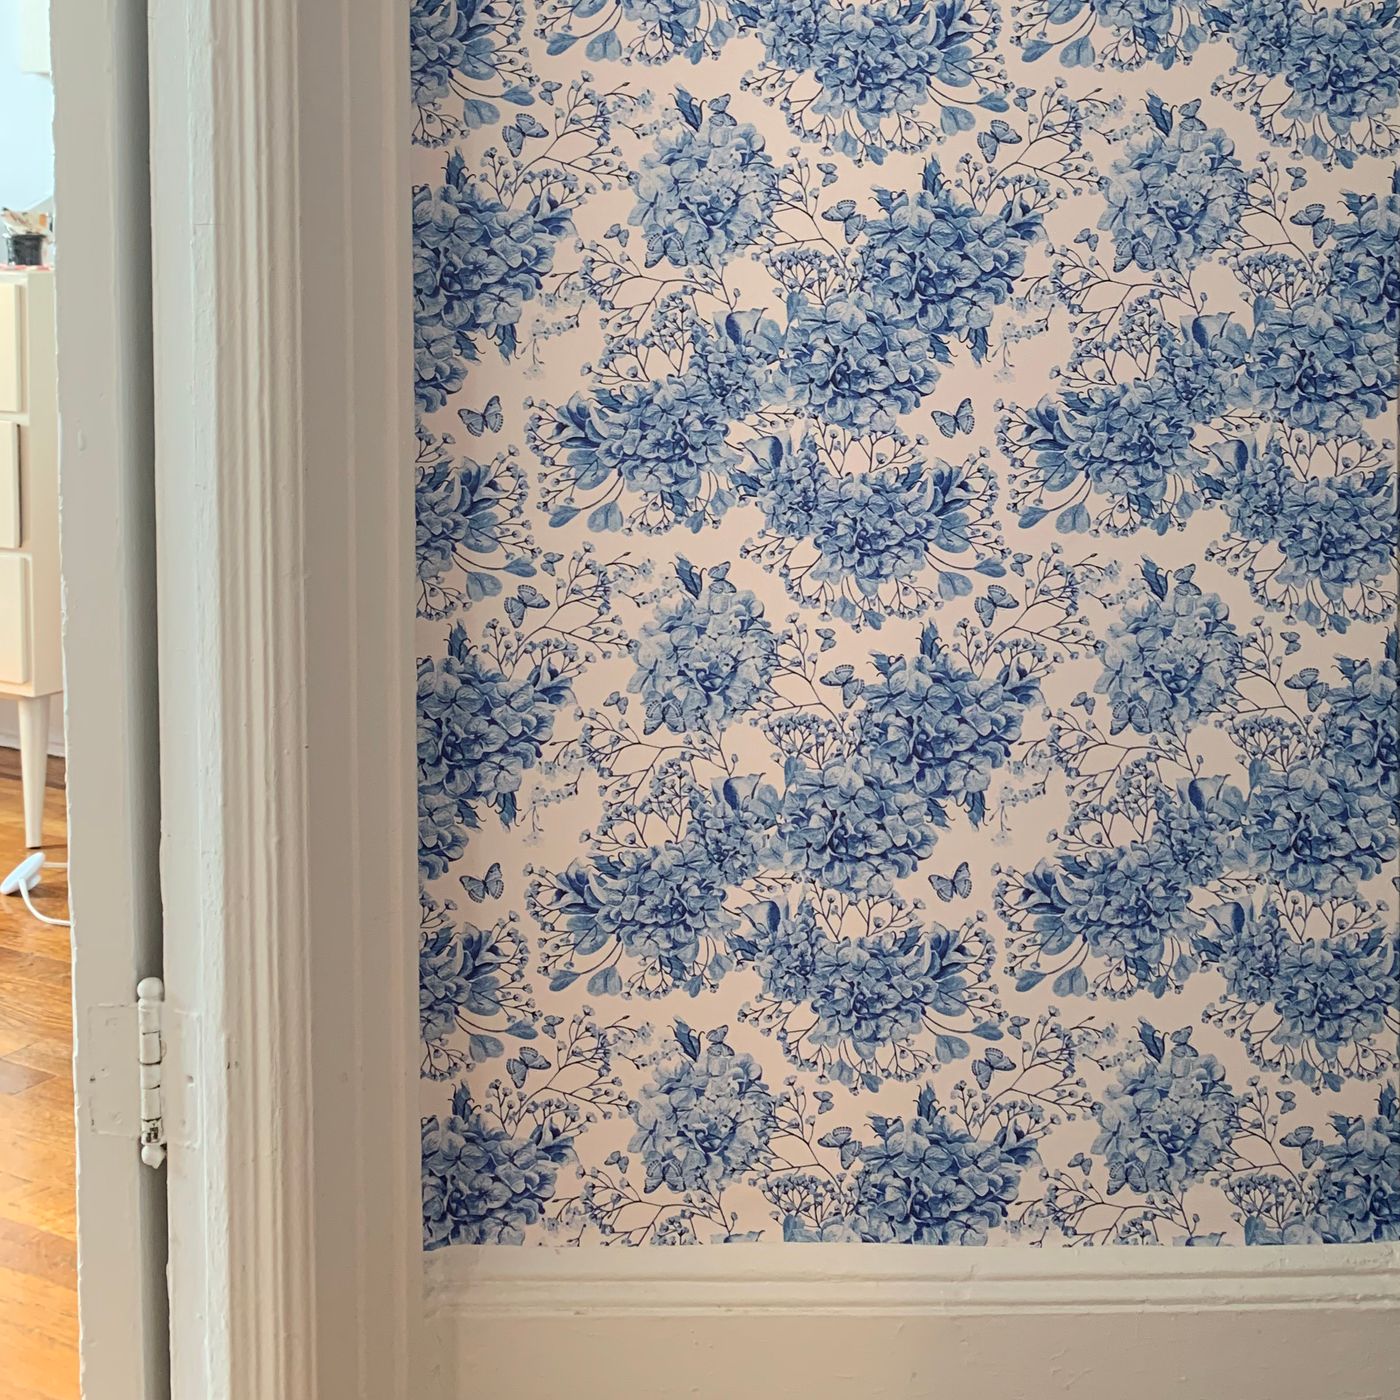 Why Use a More Expensive Wallpaper Primer vs a Less Expensive One?